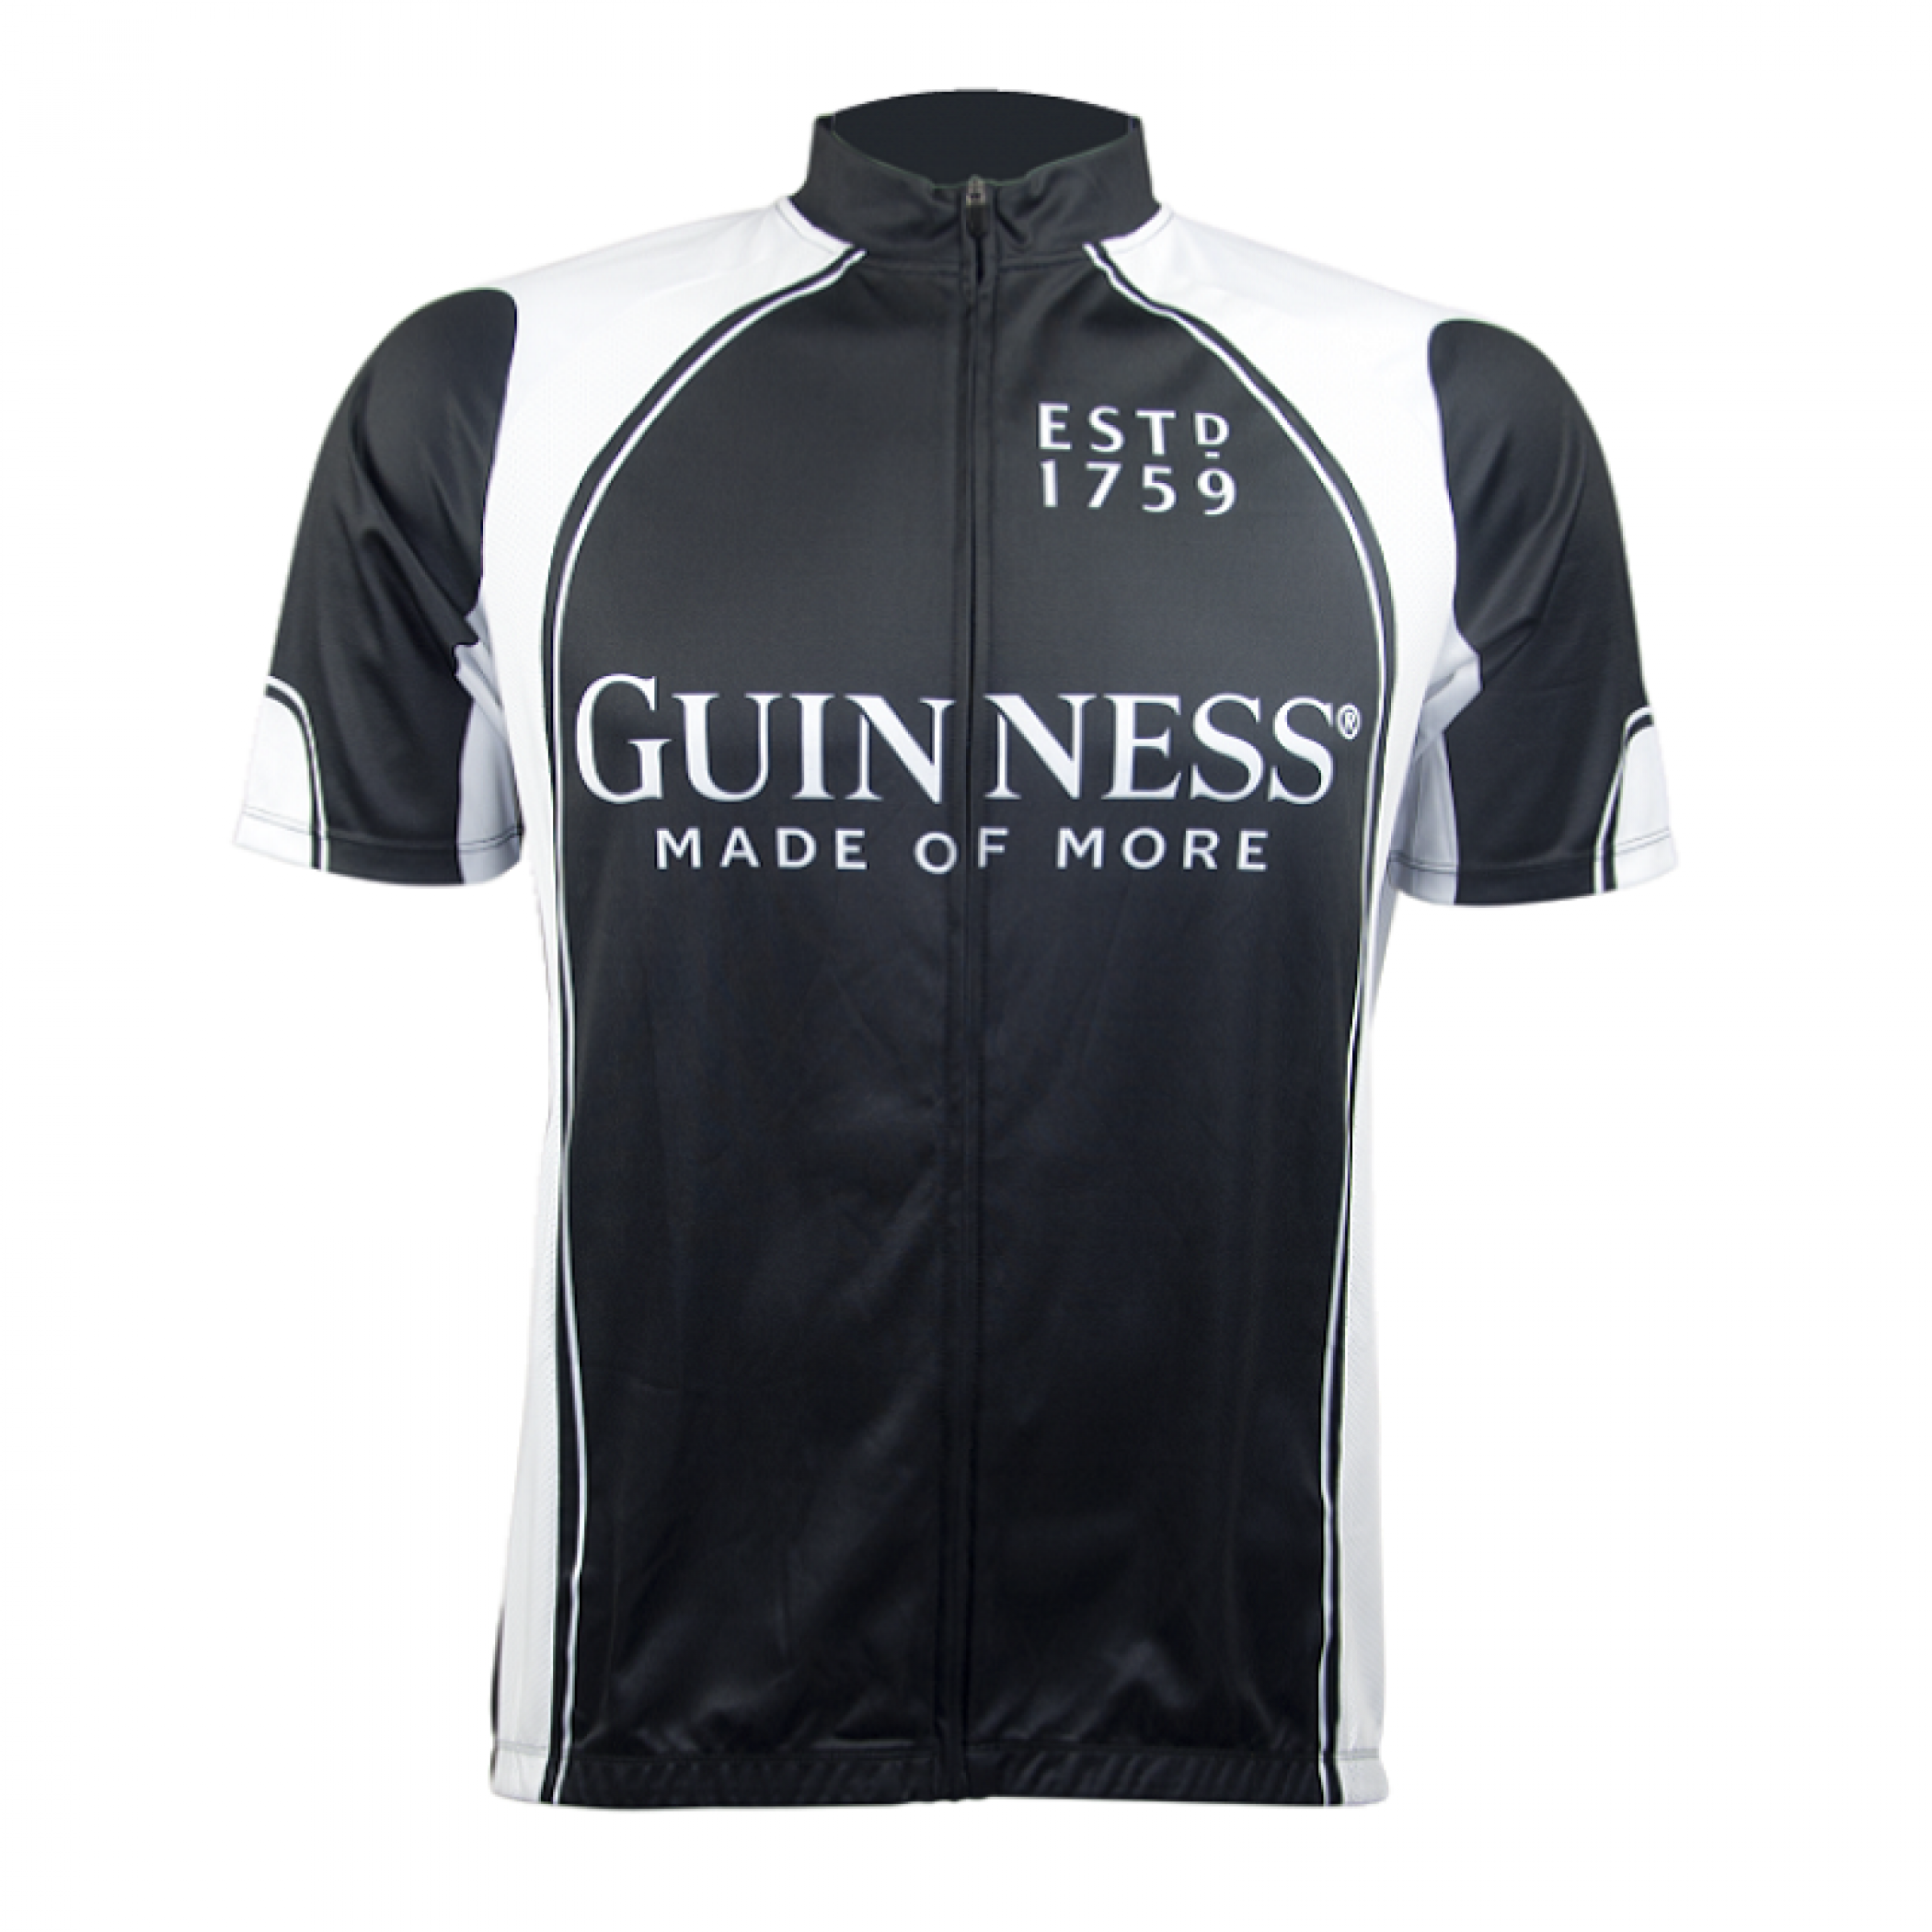 Guinness Made of More Cycling Jersey